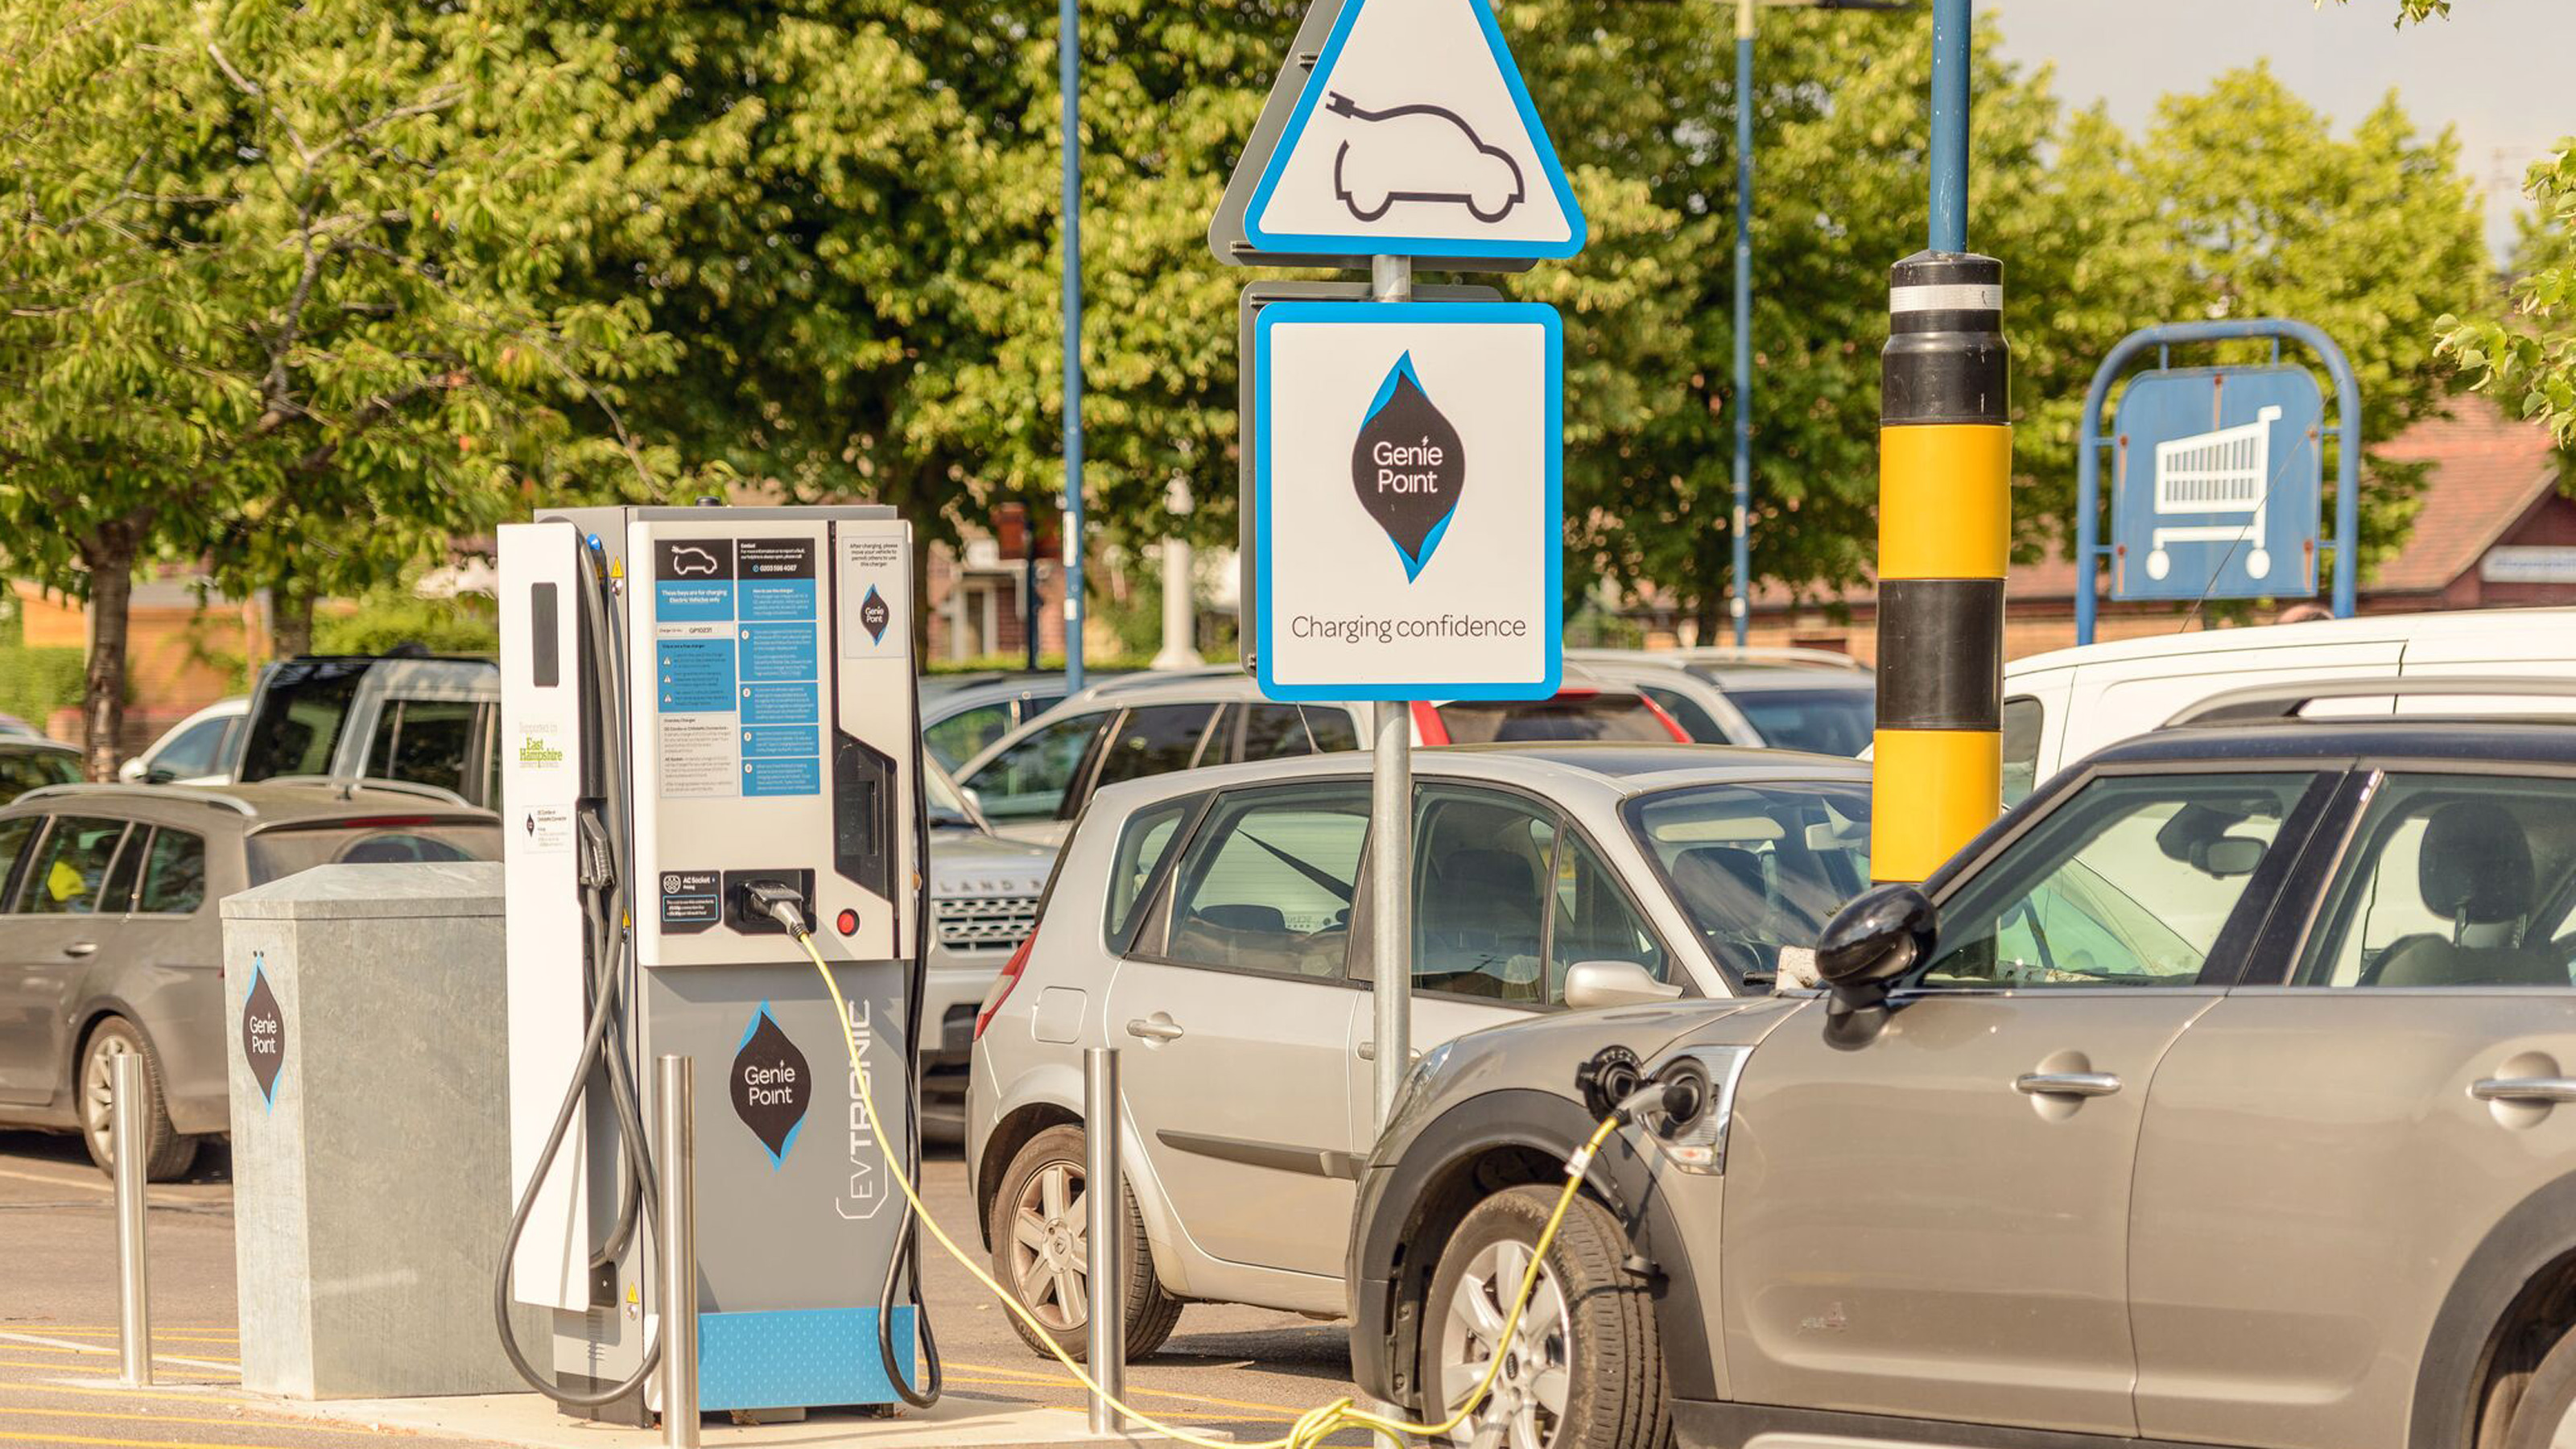 Fast charging or rapid charging? Electric car charger types explained